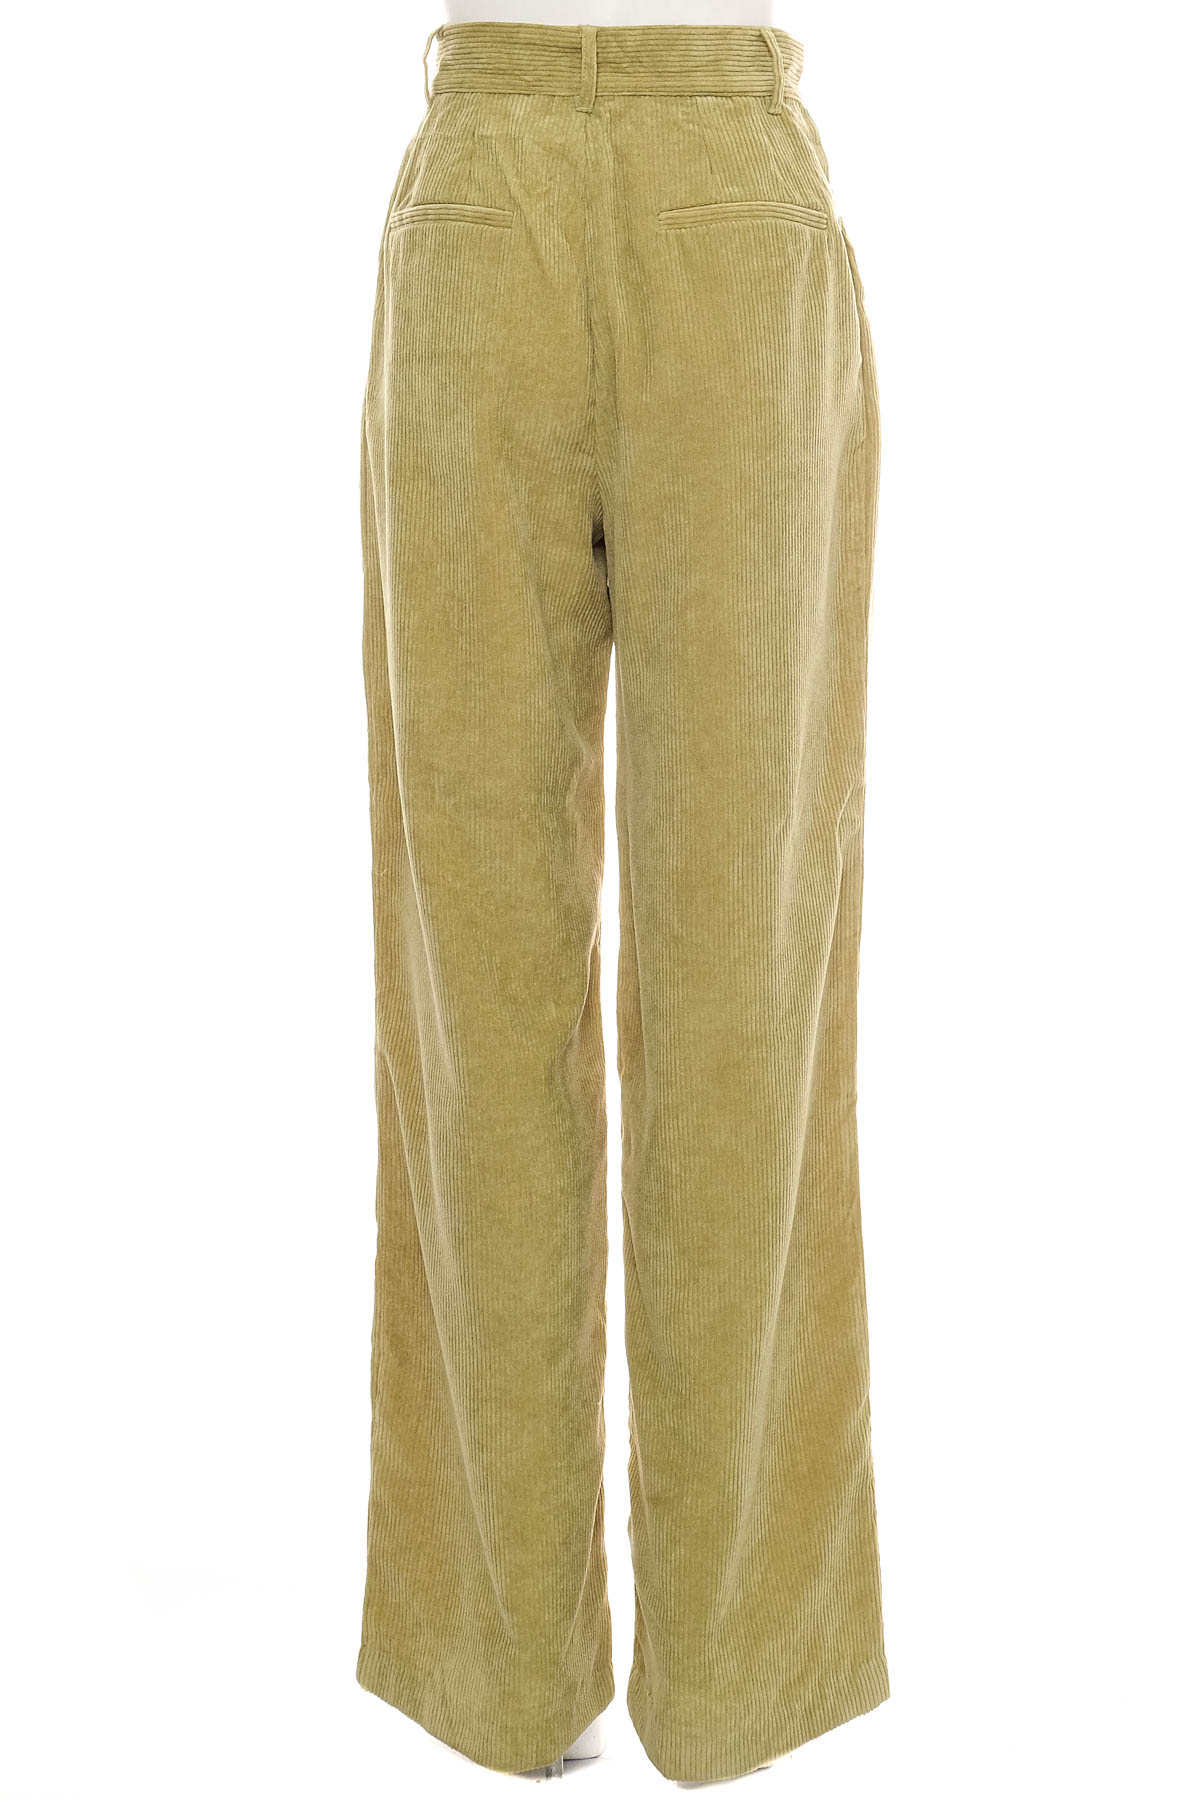 Women's trousers - Emory Park - 1